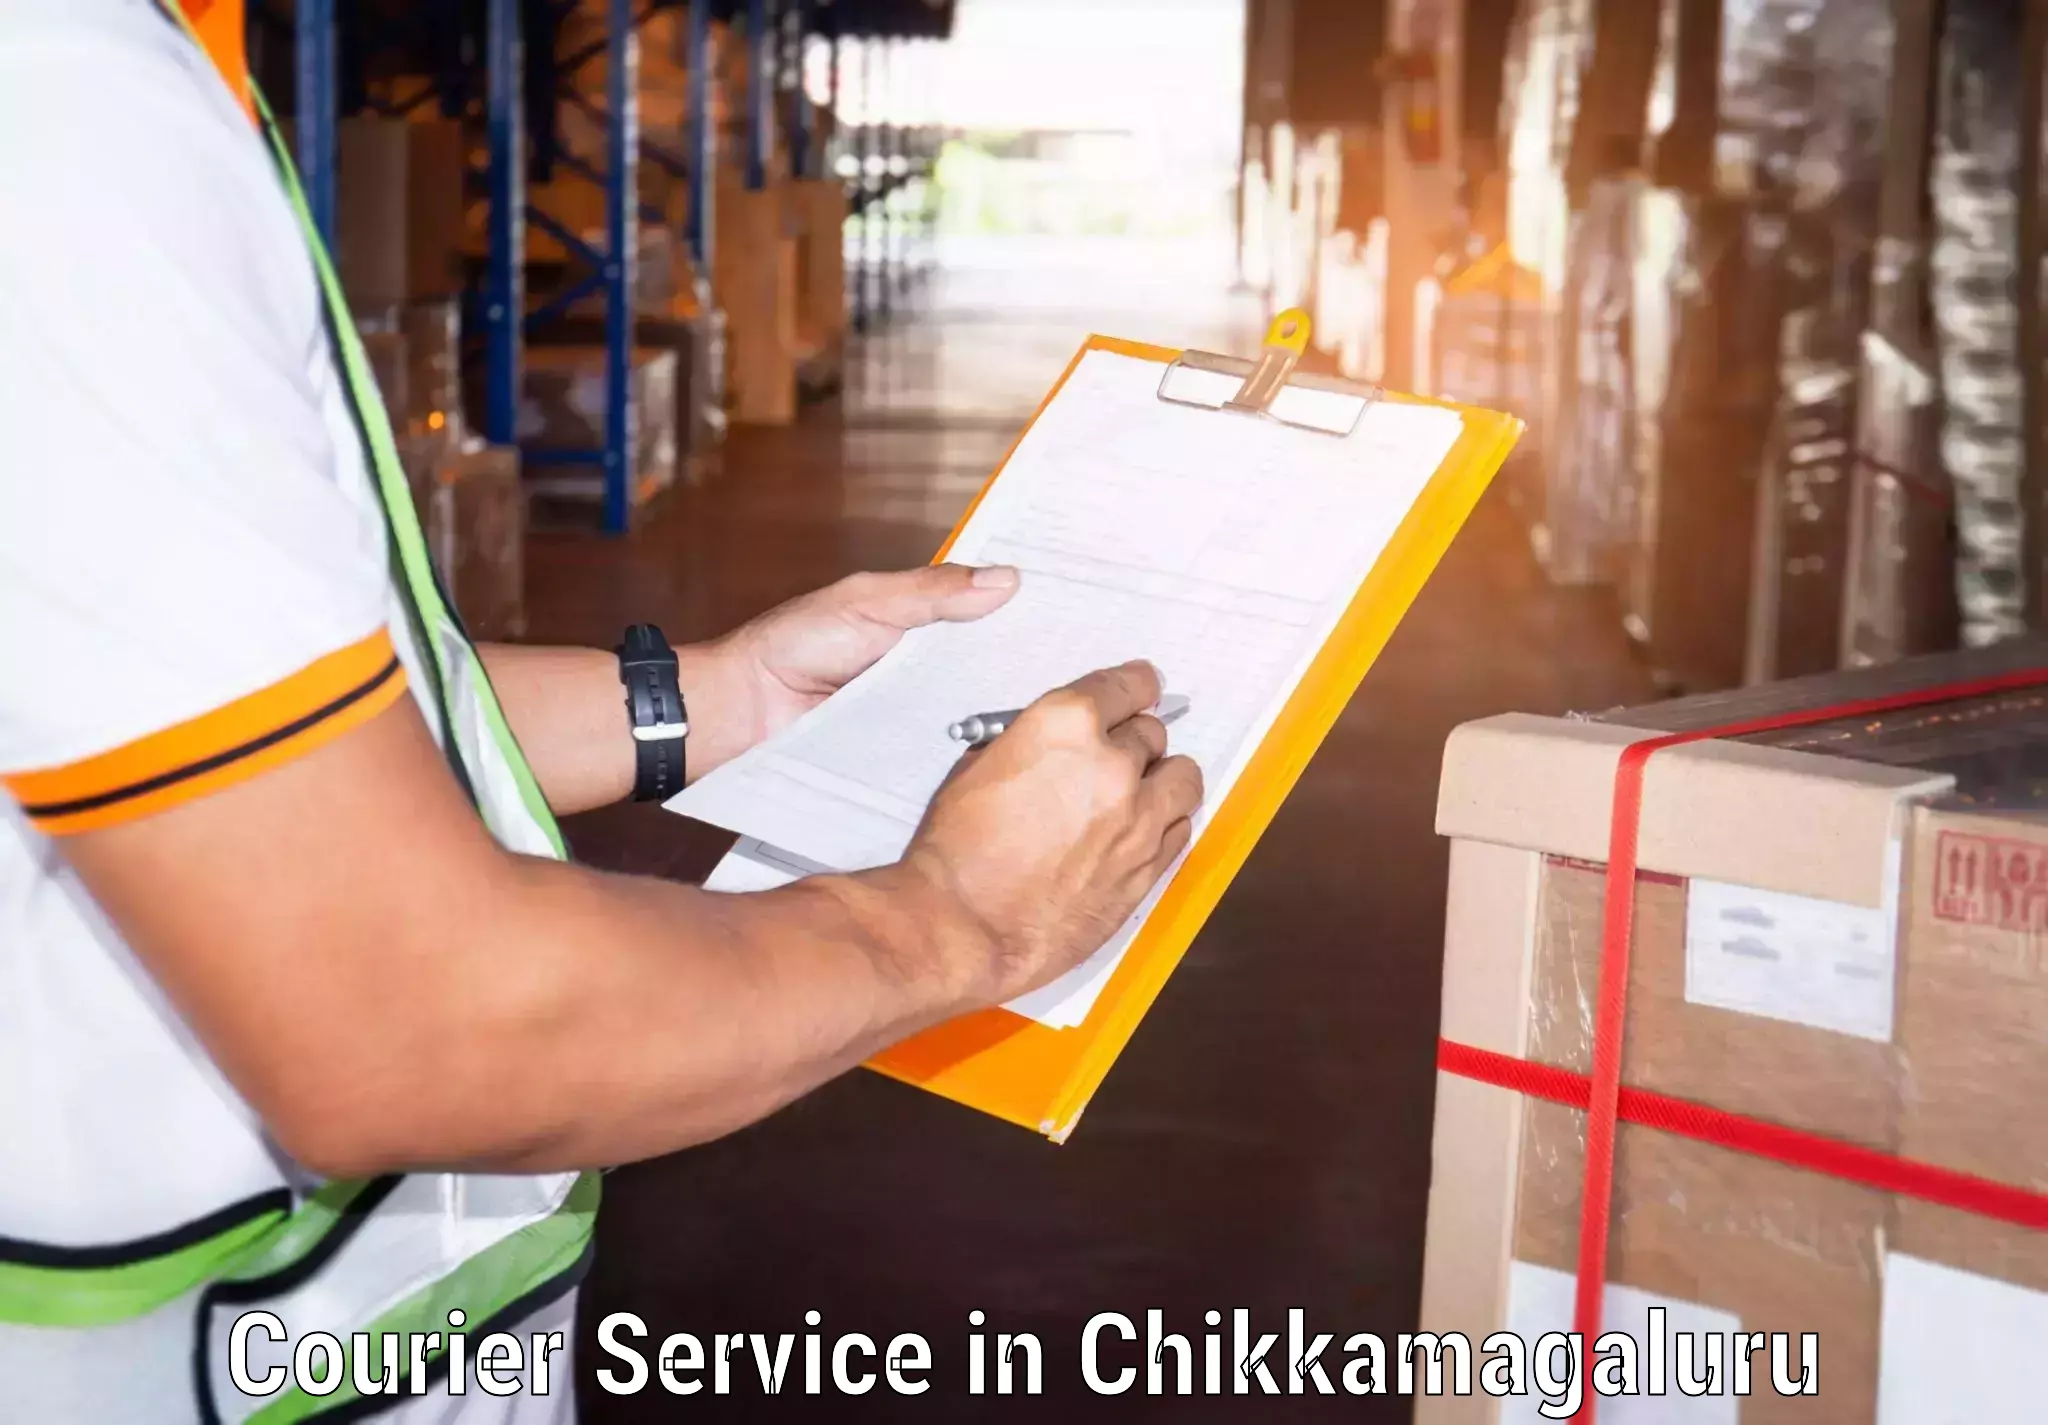 Advanced delivery network in Chikkamagaluru